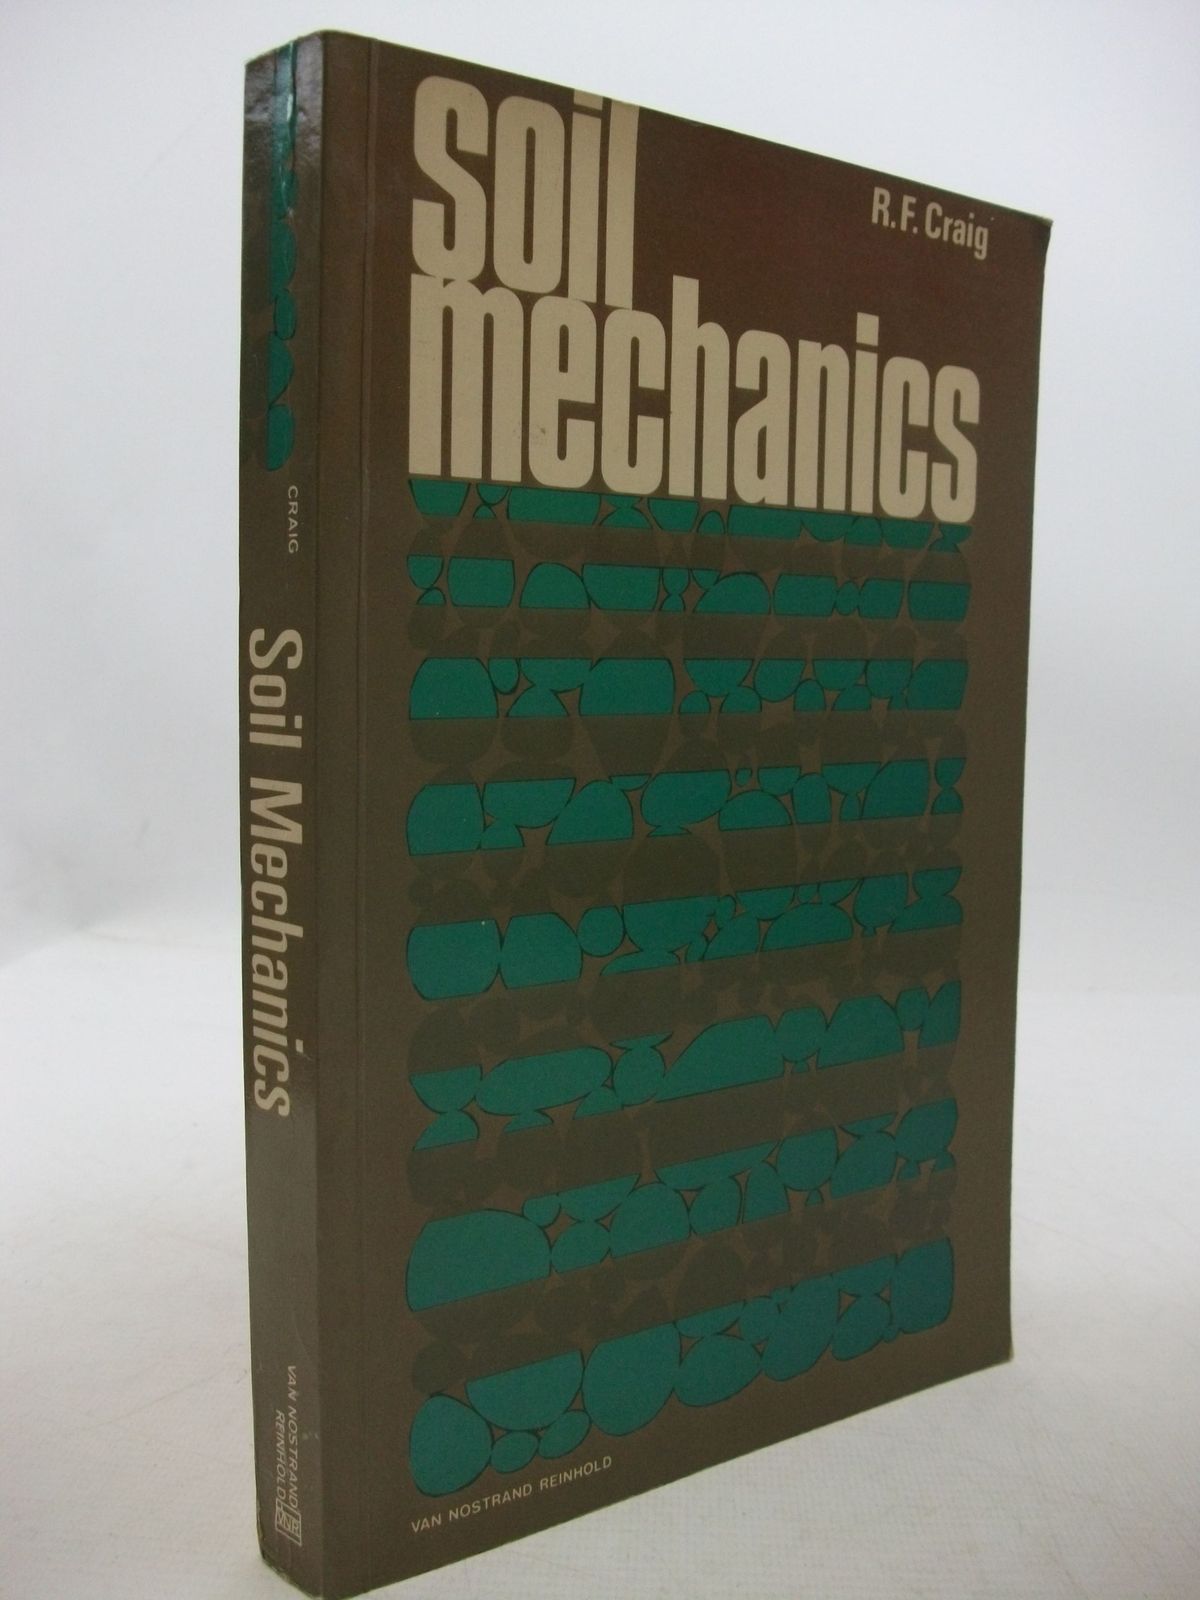 Photo of SOIL MECHANICS written by Craig, R.F. published by Van Nostrand Reinhold Company (STOCK CODE: 2111459)  for sale by Stella & Rose's Books